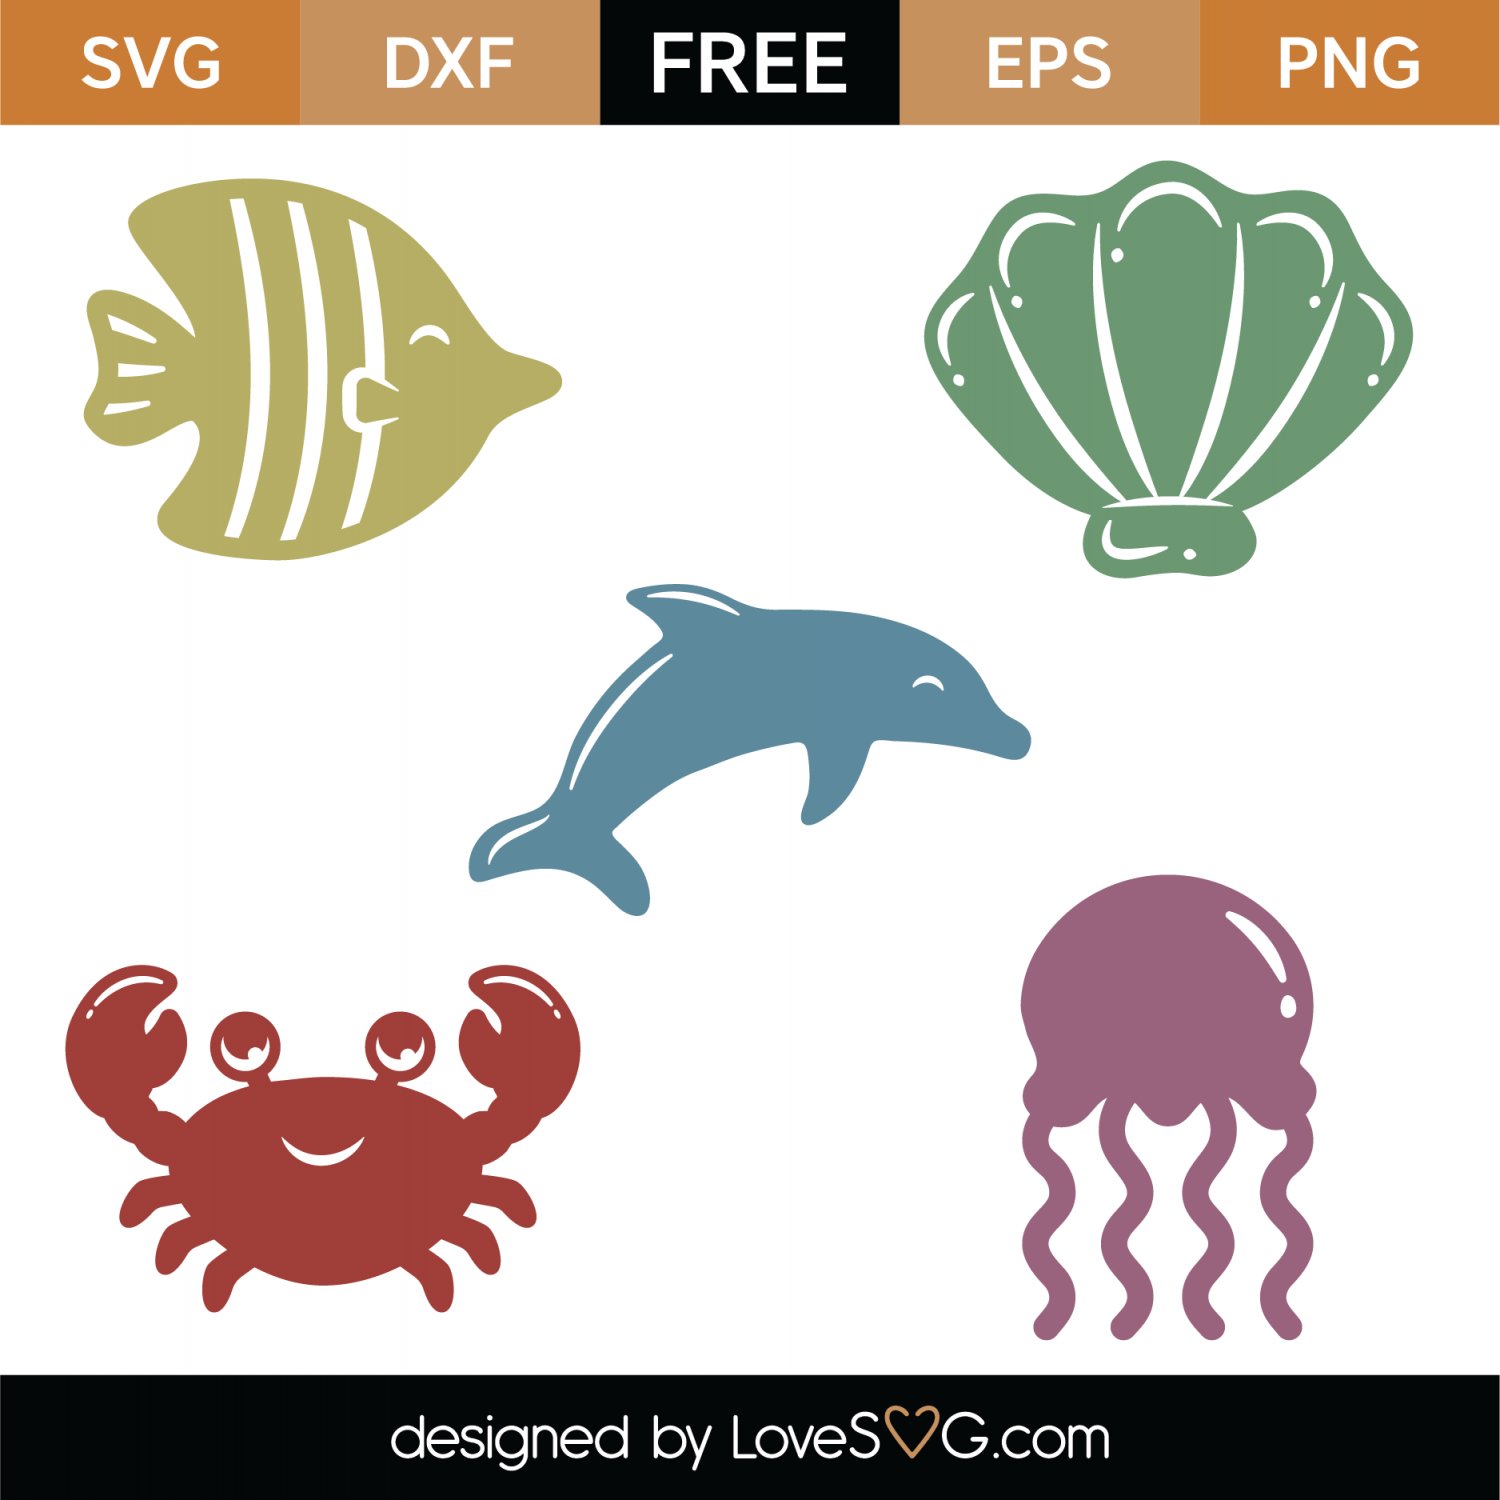 Download Art Collectibles Clip Art Fish Cricut Files Sea World Clipart Files Dolphin Silhouette Dxf Sea Animals Svg Cut Files Svg Eps Png